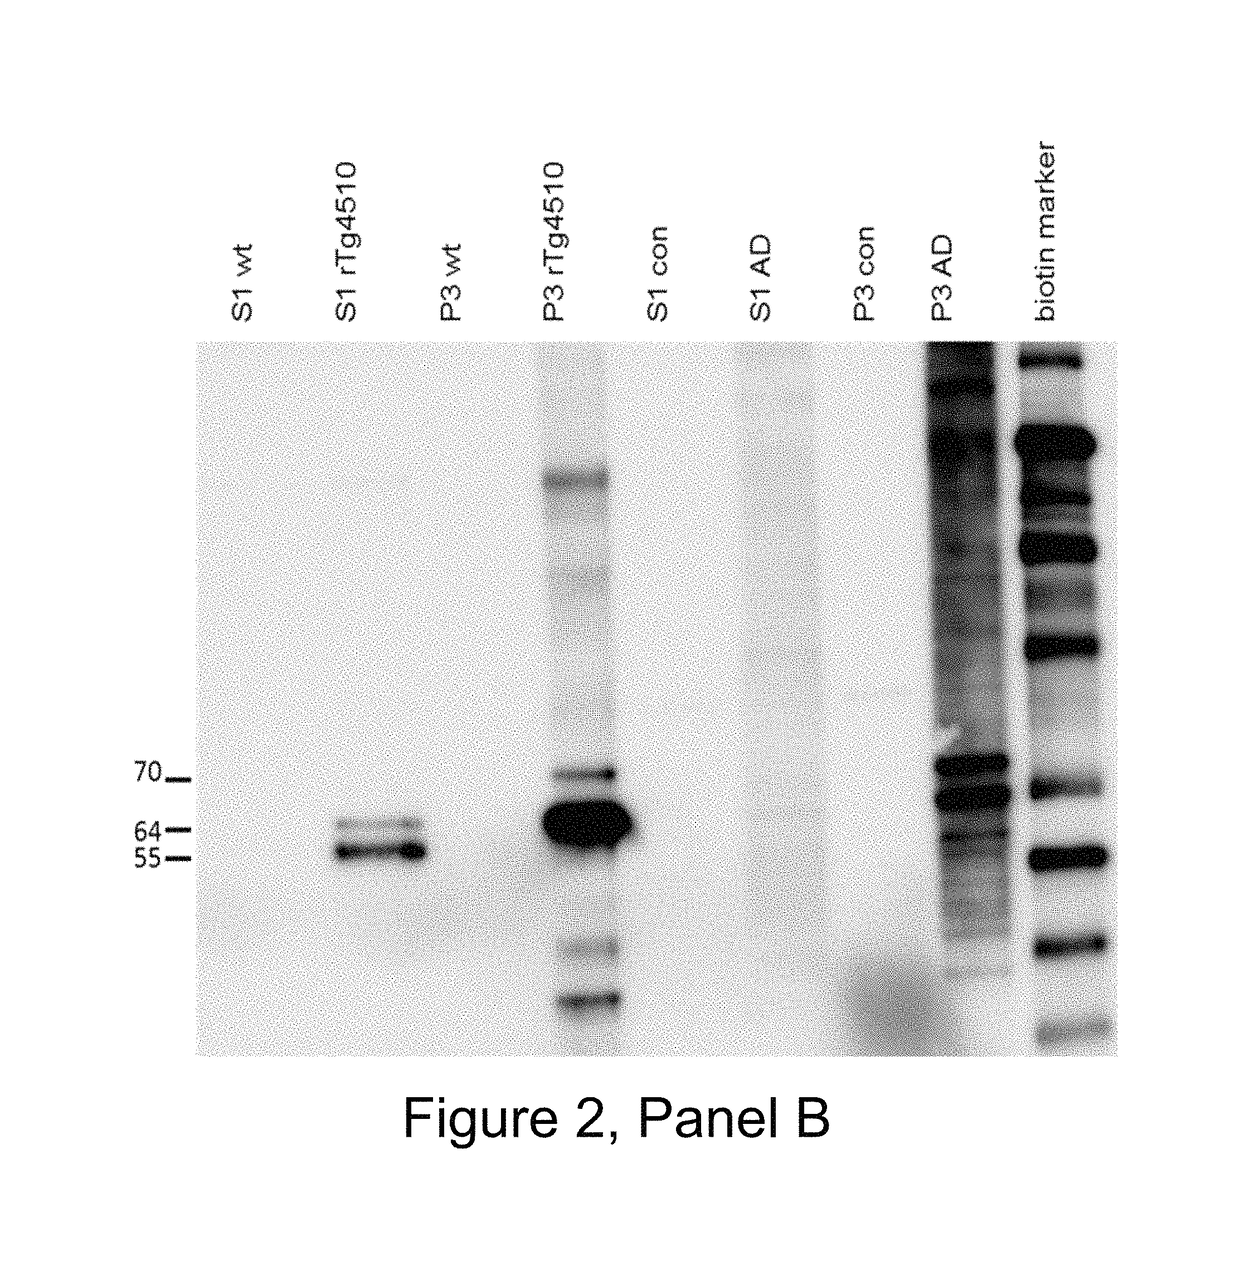 Antibodies specific for hyperphosphorylated tau and methods of use thereof